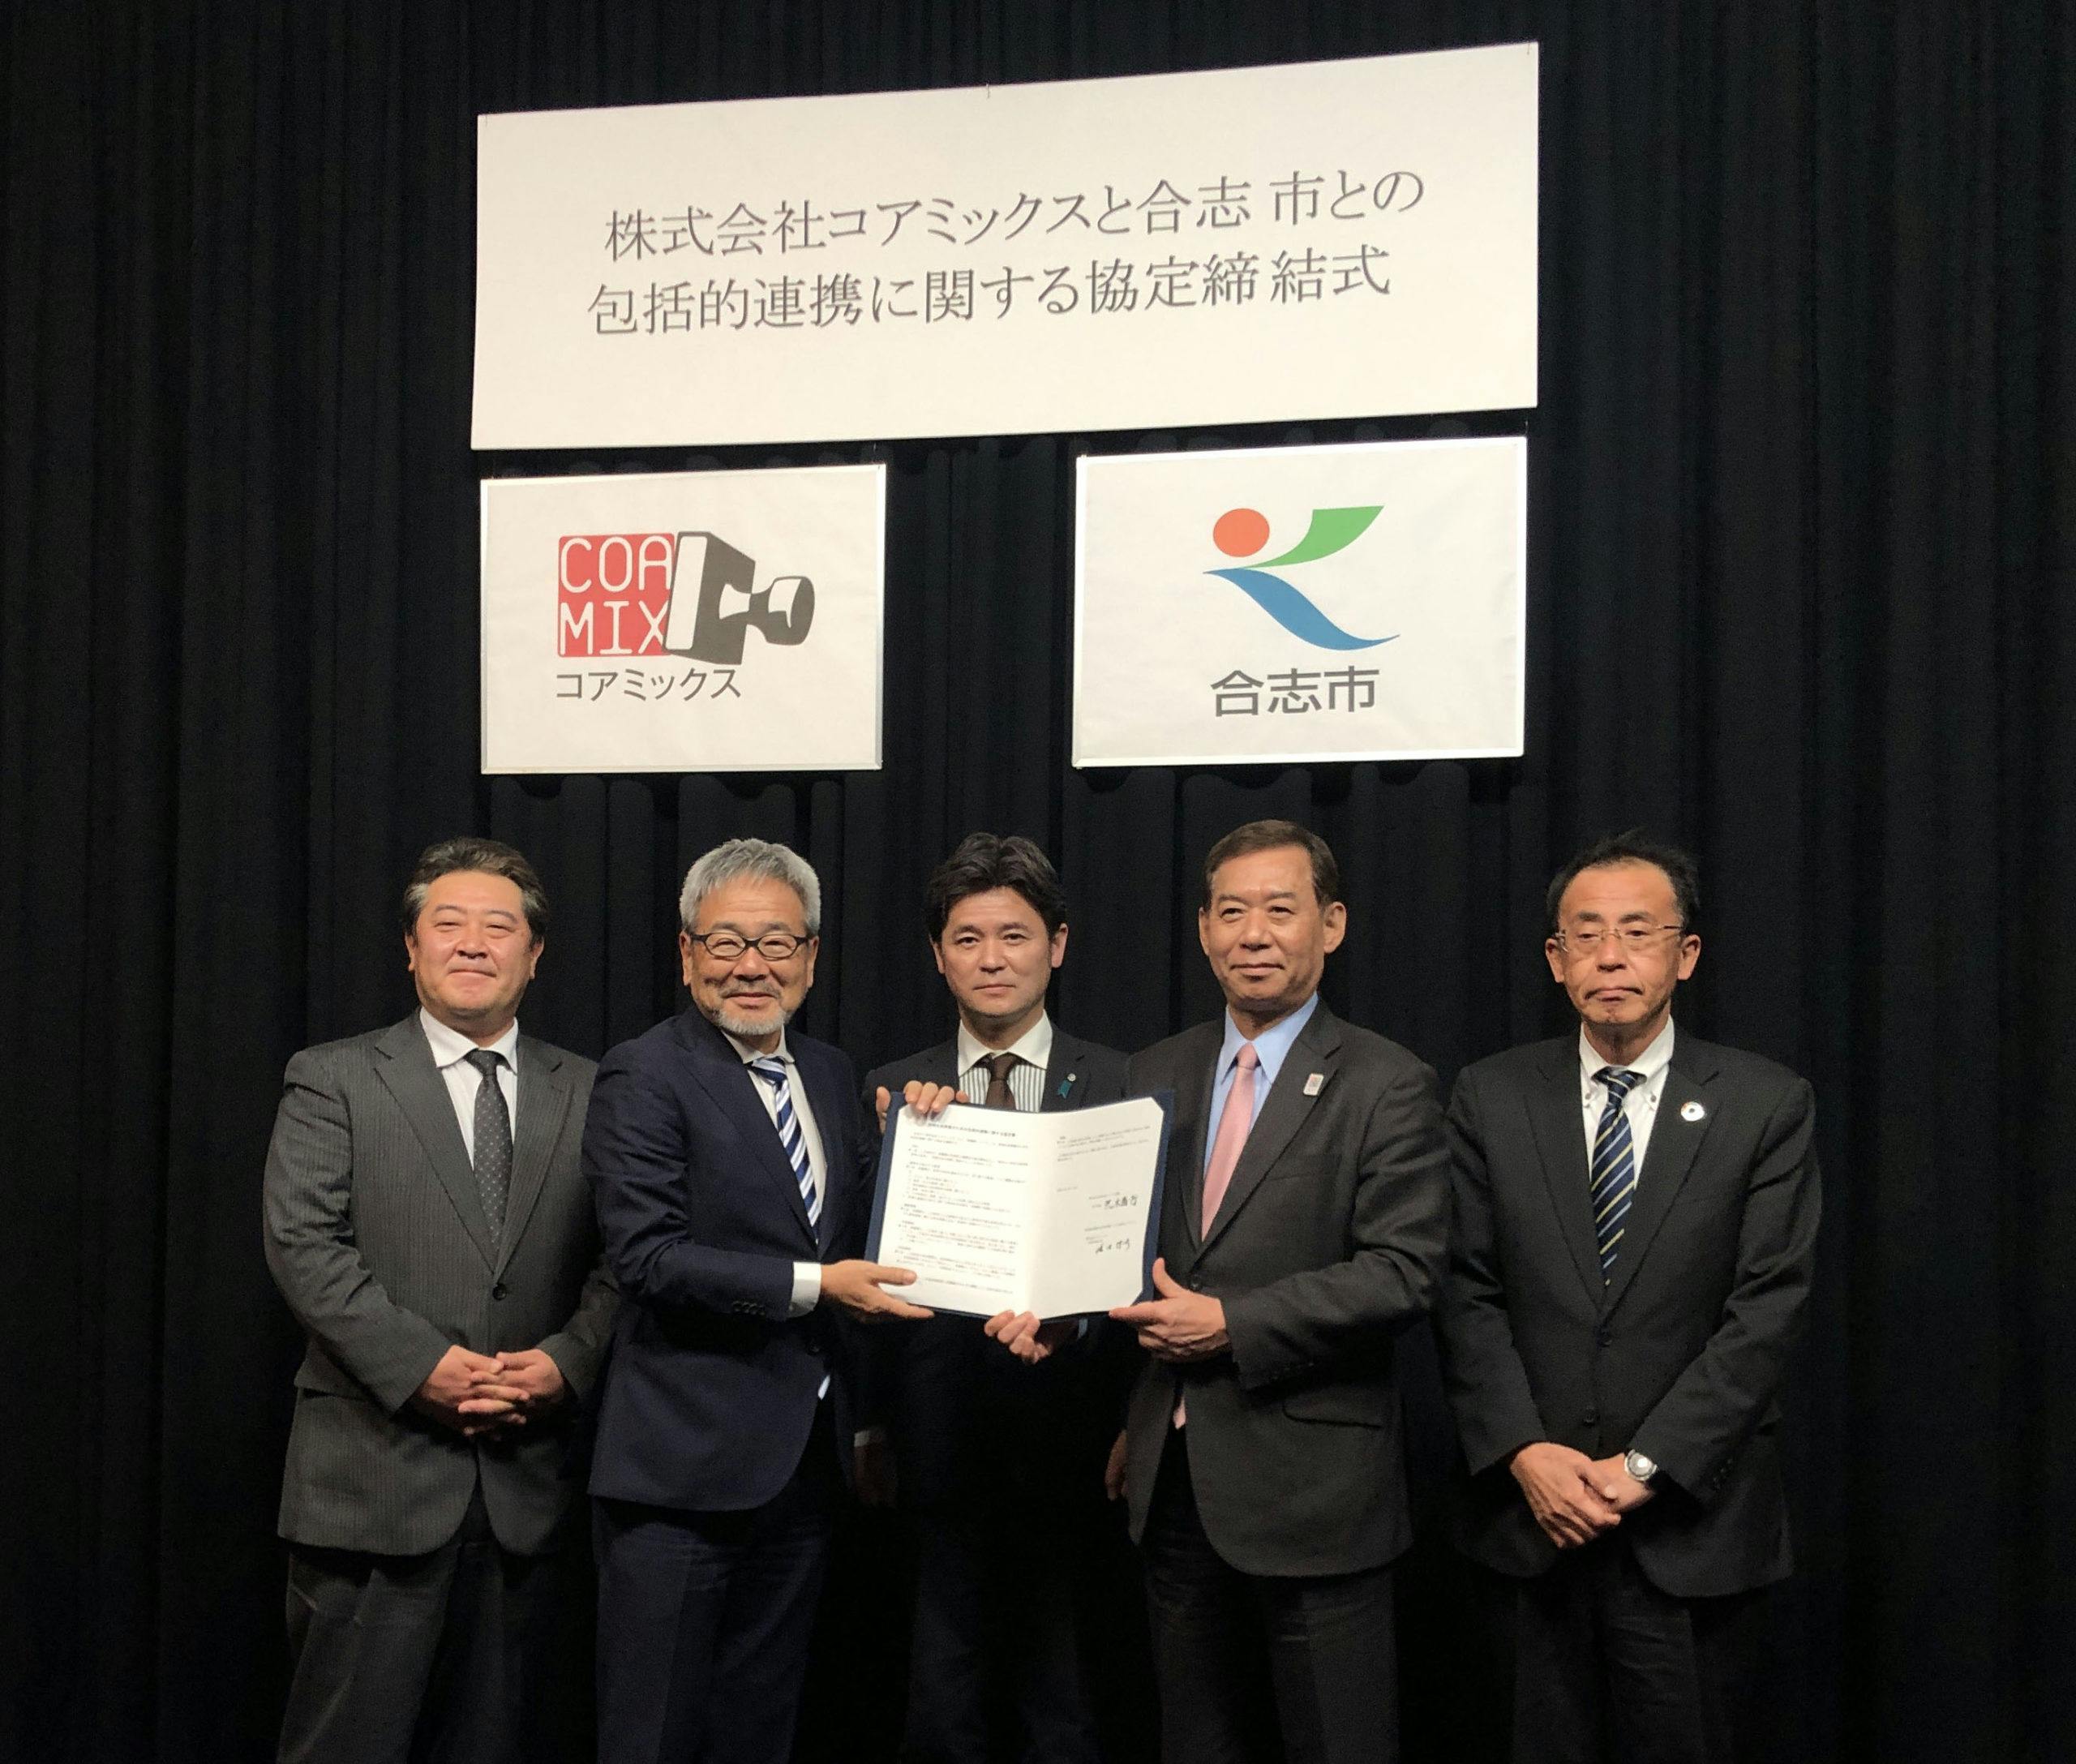 Concluded a comprehensive partnership agreement with Koshi City, Kumamoto Prefecture